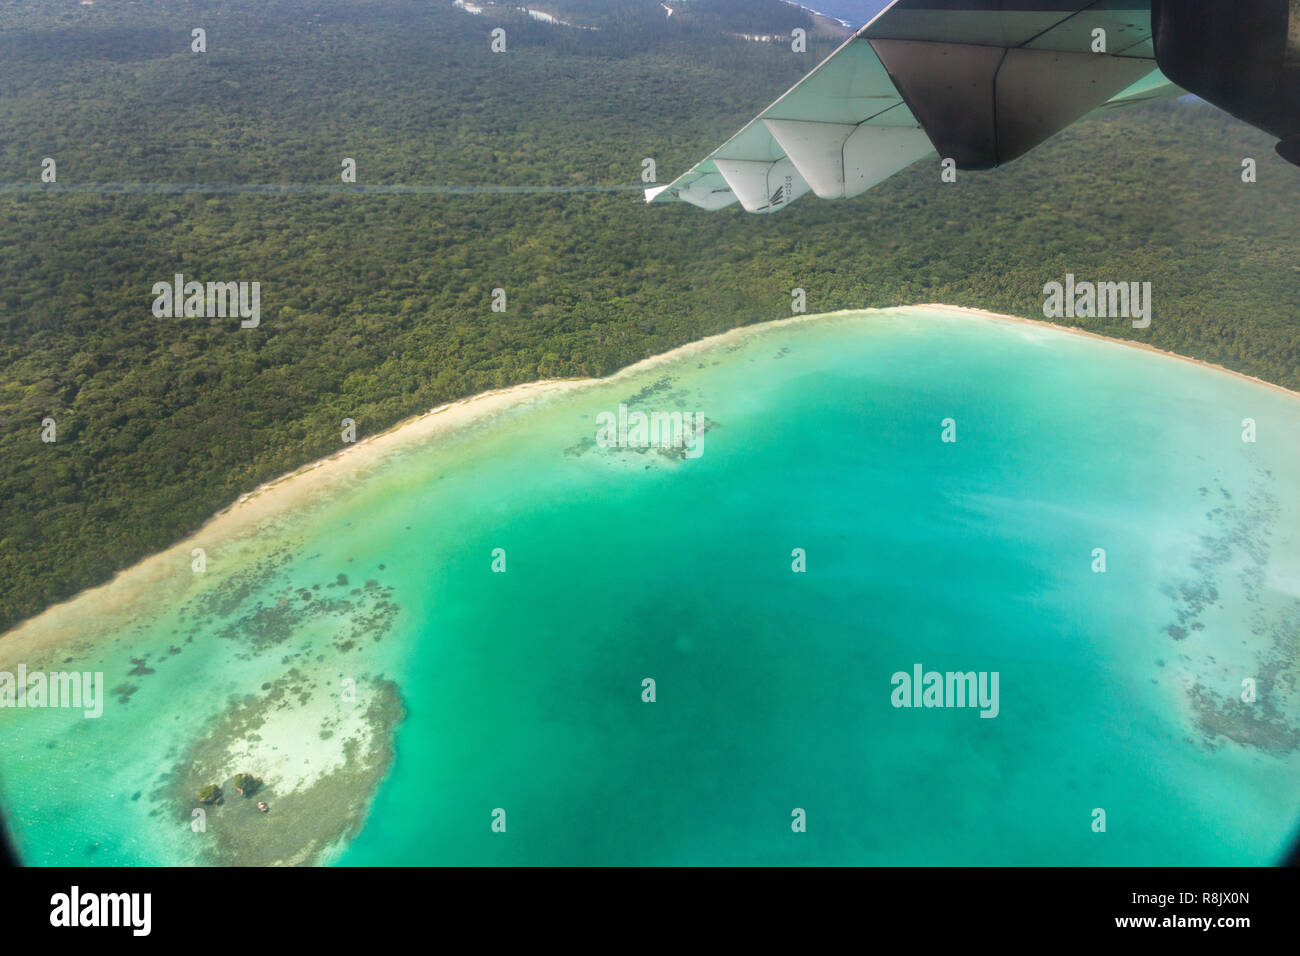 A view of azure lagoon and yellow sandy beach from a regional turboprop/propeller airplane window while arriving/departing Isle of Pines (L'Ile-des-Pins). Flying over New Caledonia, Melanesia, Oceania Stock Photo